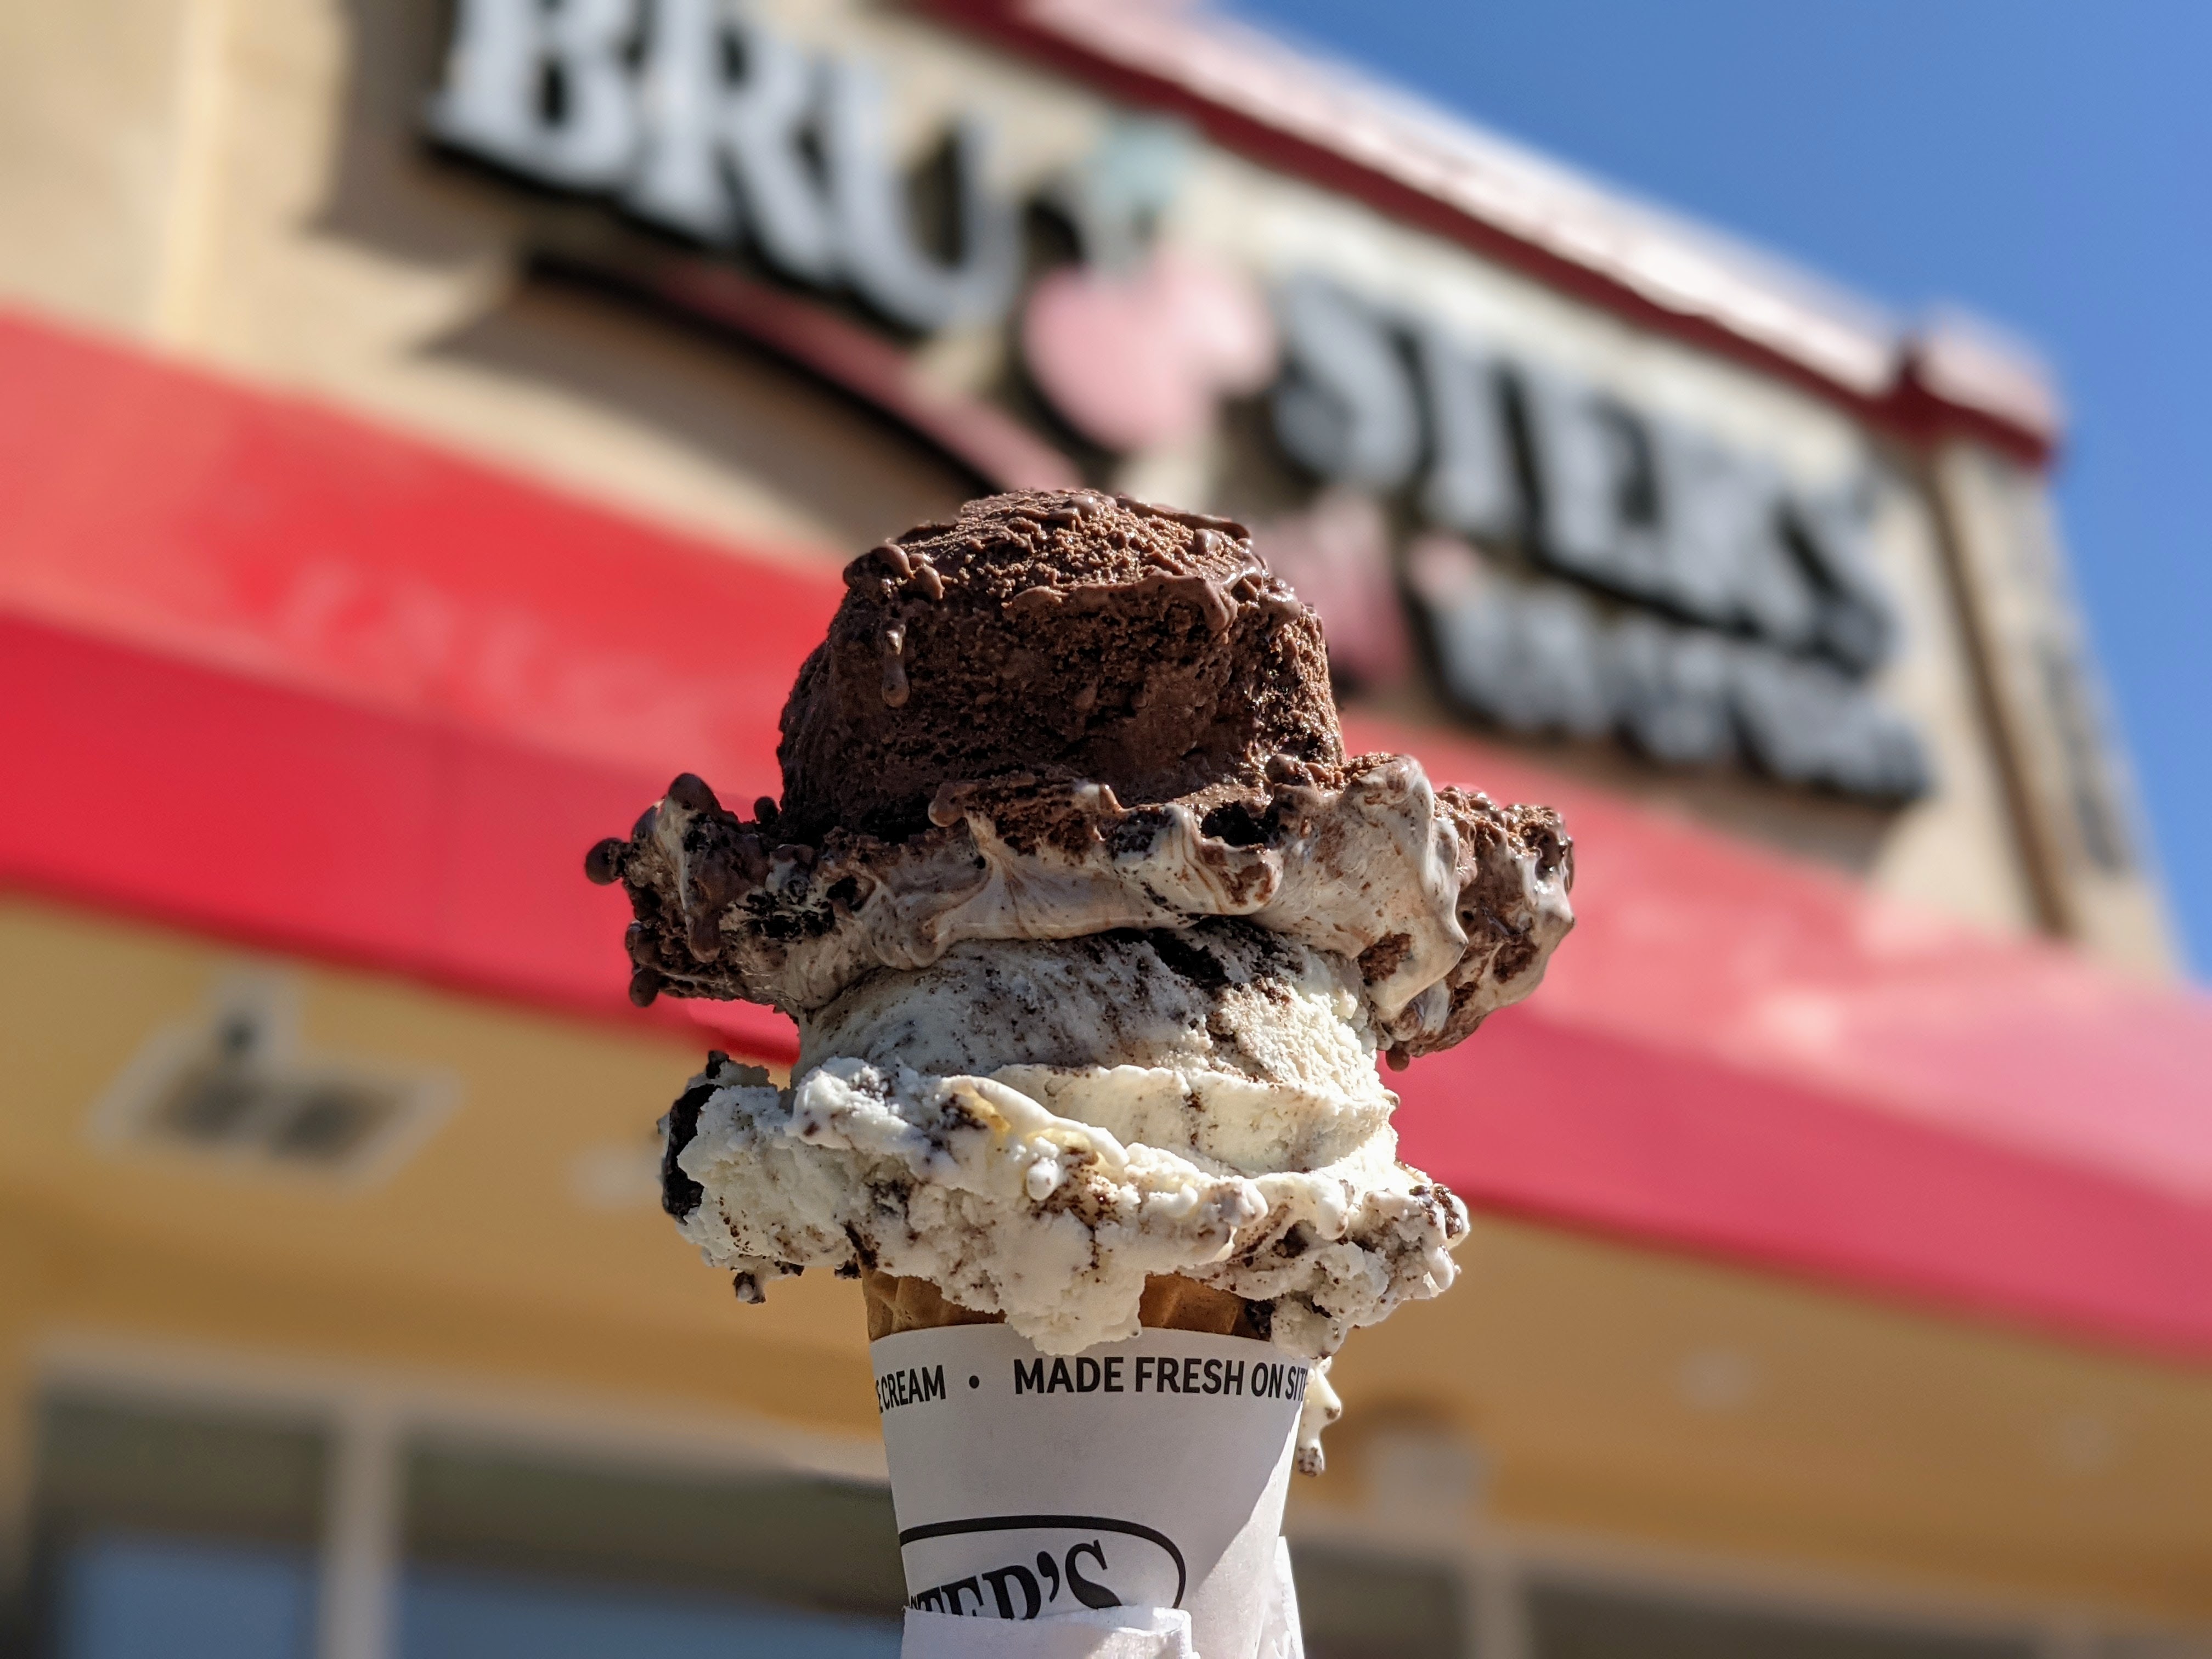 Ice cream cone with two scoops from Bruster’s Ice Cream in Los Angeles.